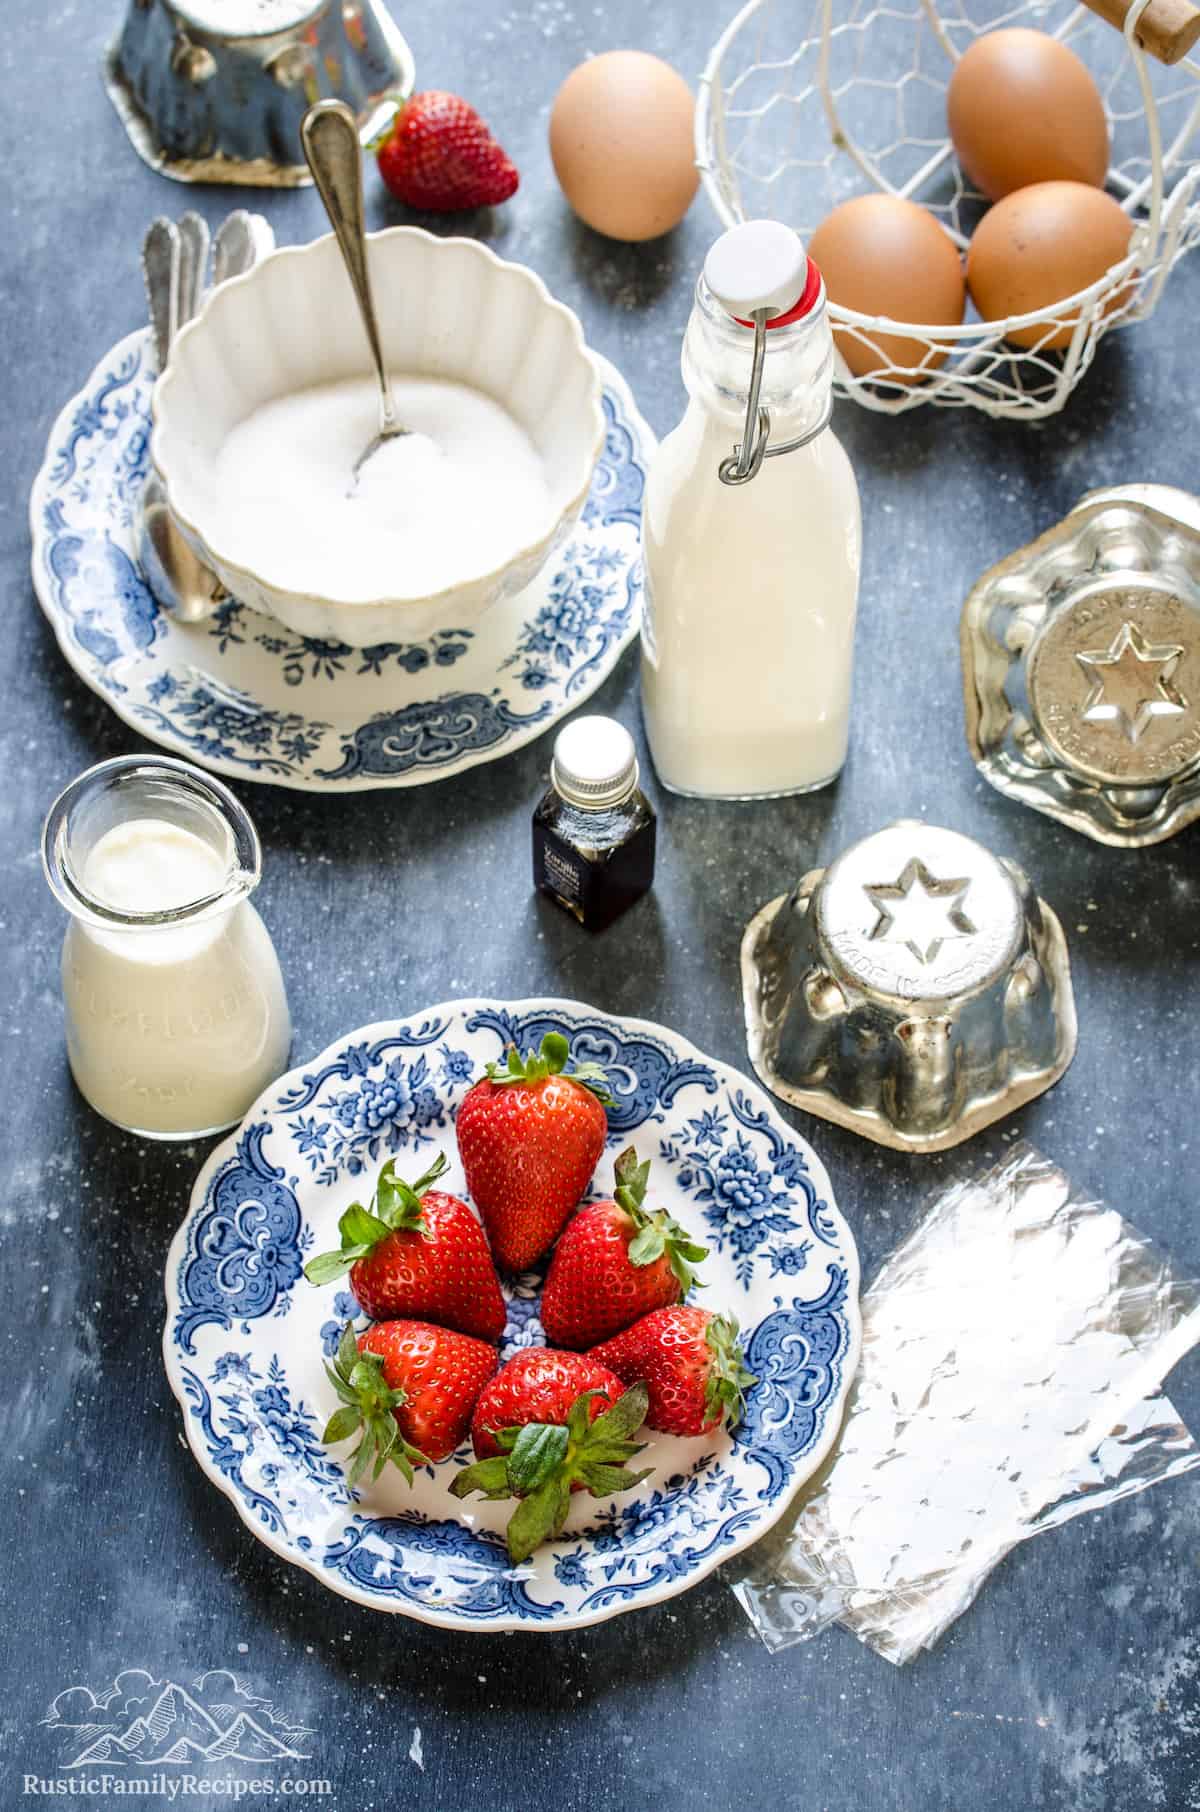 A bowl of strawberries next to a bowl of vanilla cream mixture and a bowl of eggs, next to scattered mini bundt cake tins.